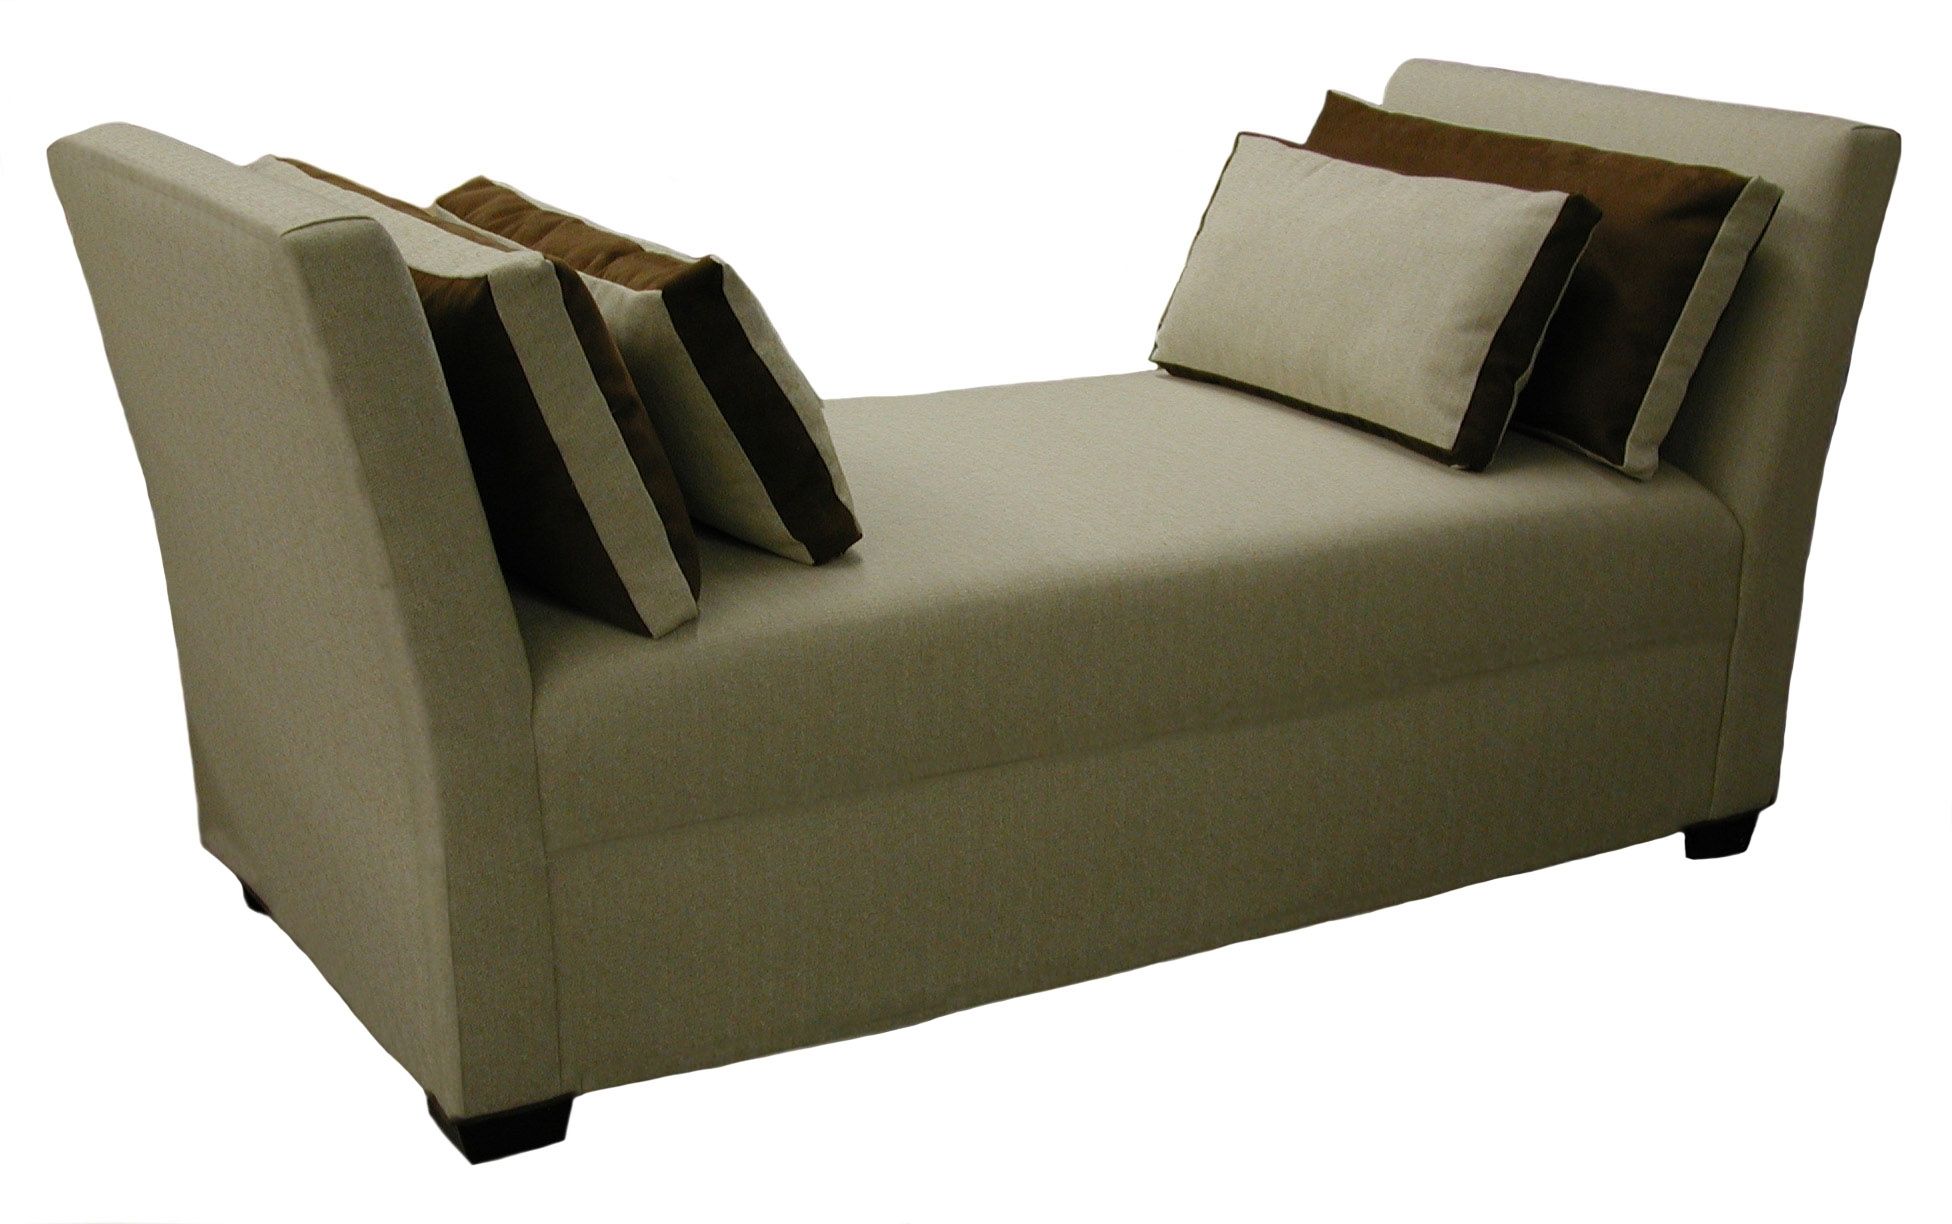 Famous Chaises Lounge Chair Daybeds Nc Free Ship Carolina Chair With Regard To Daybed Chaises (View 11 of 15)